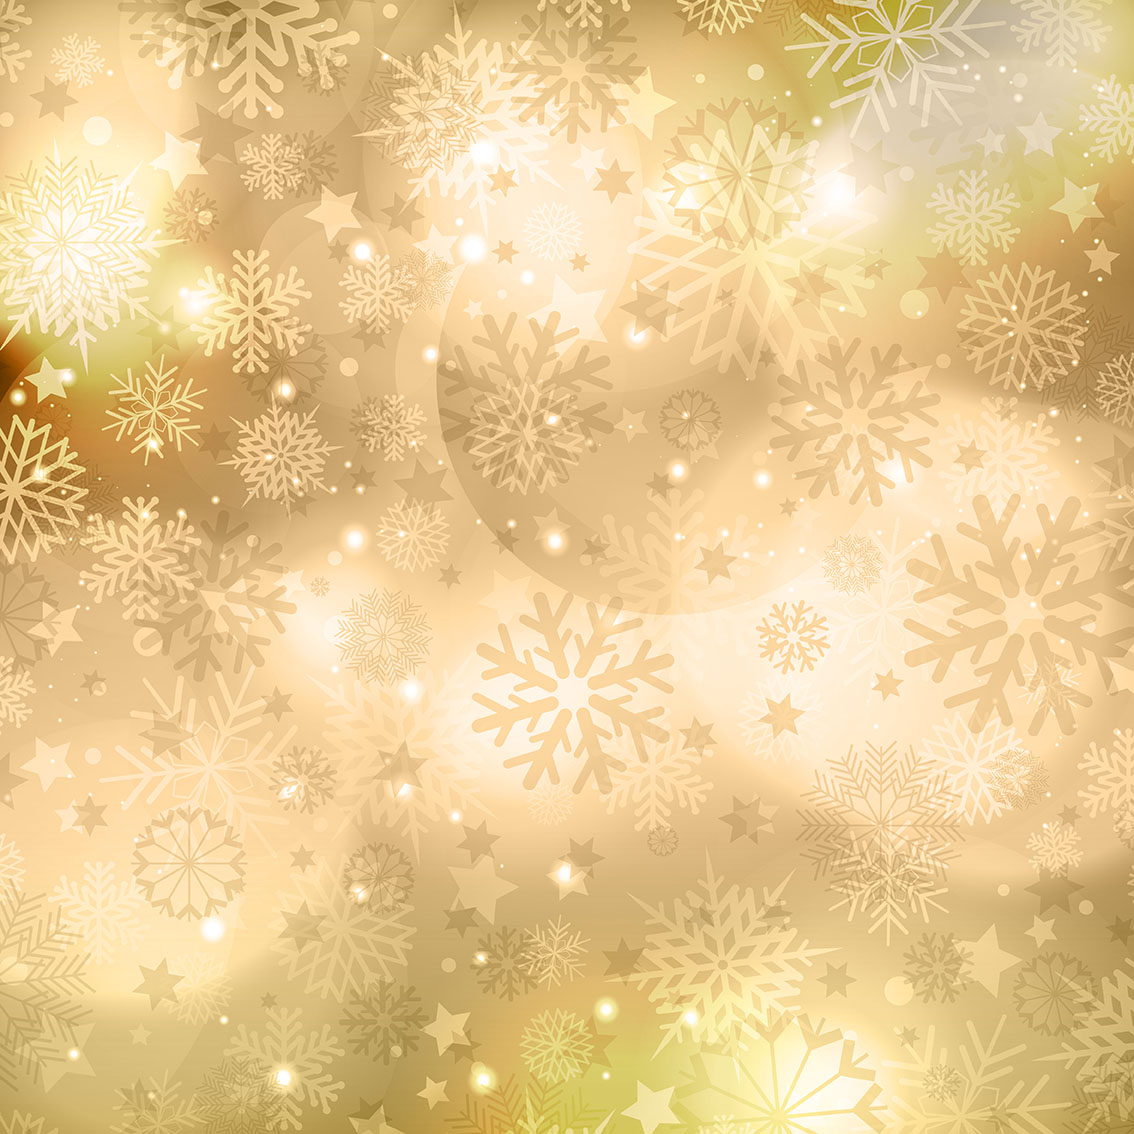 Gold Christmas background - Download Free Vectors, Clipart ...